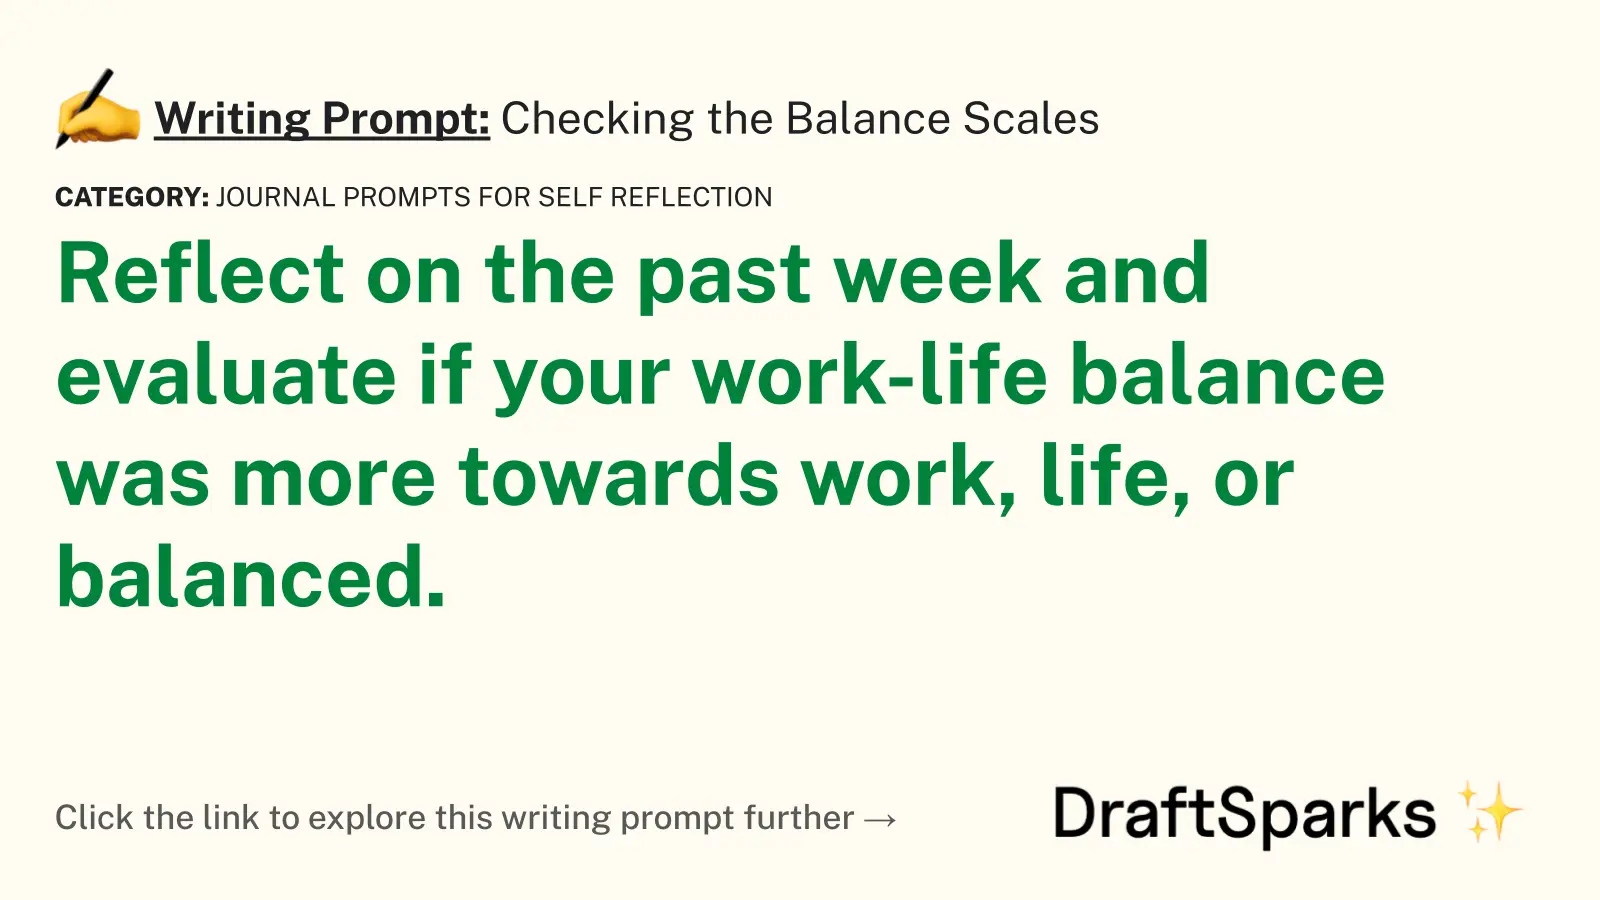 Checking the Balance Scales